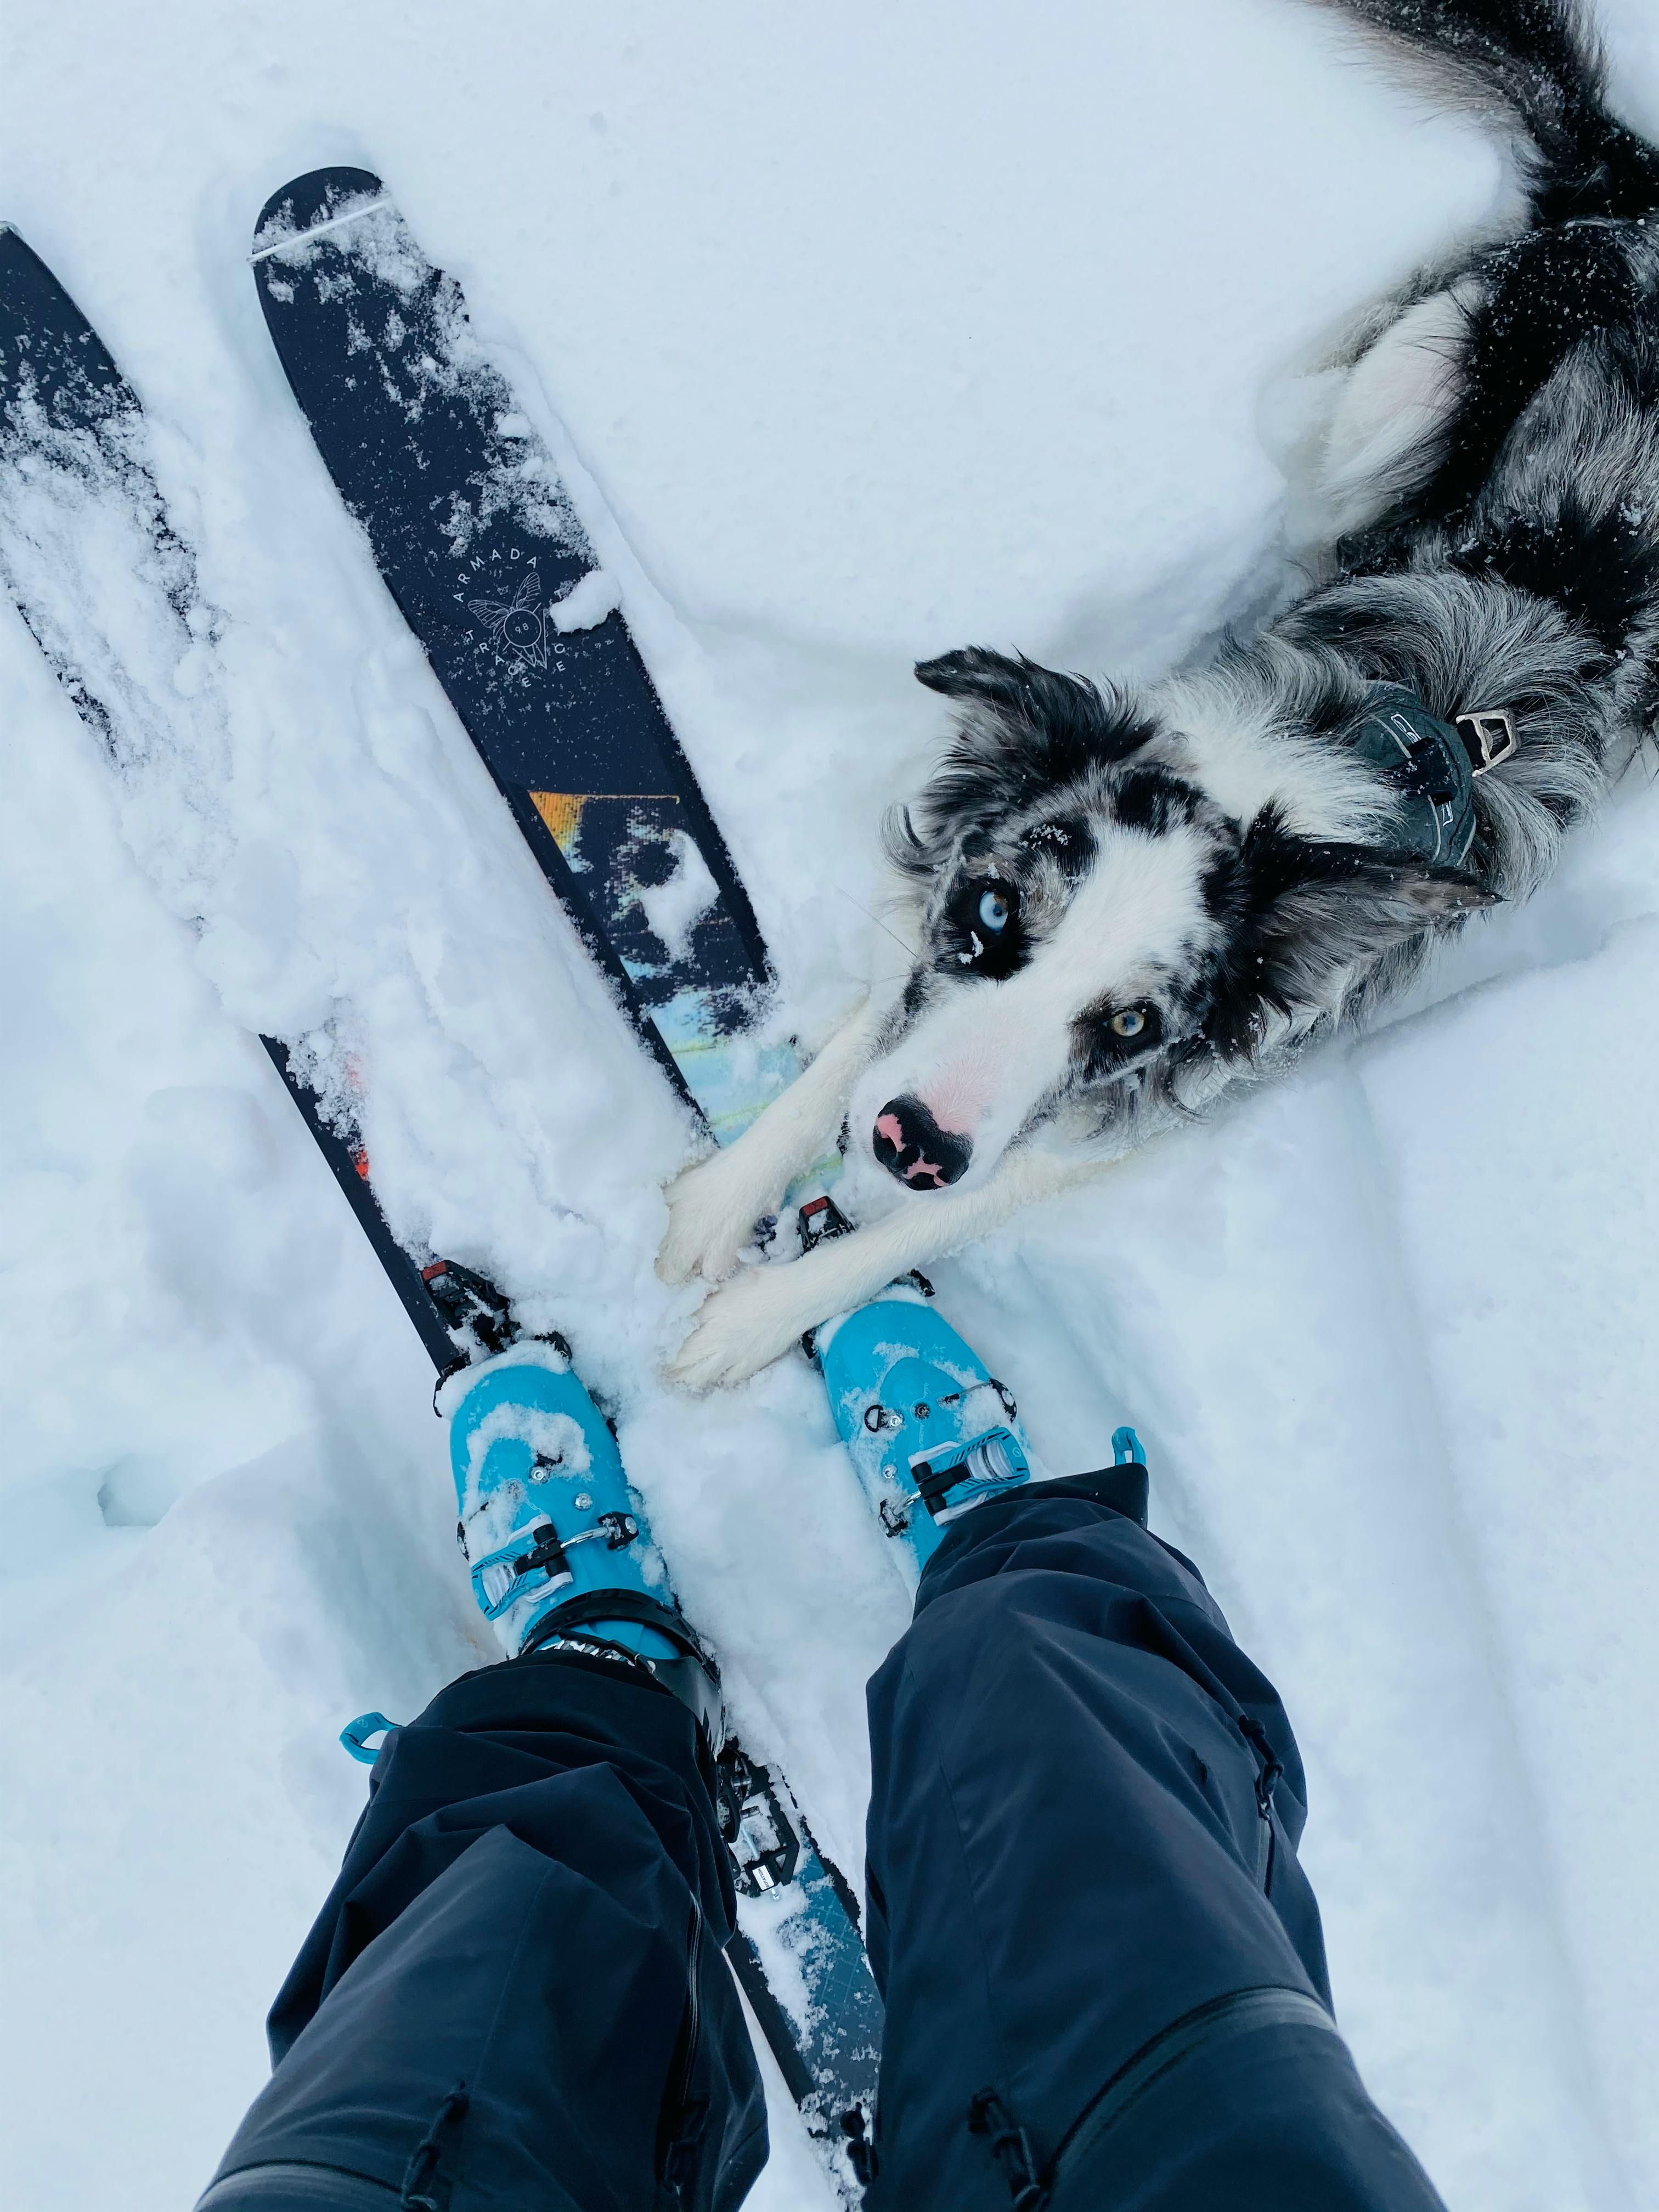 Photo of Dynafit Rotation 10 bindings on Armada Trace 98s, with a cute dog.